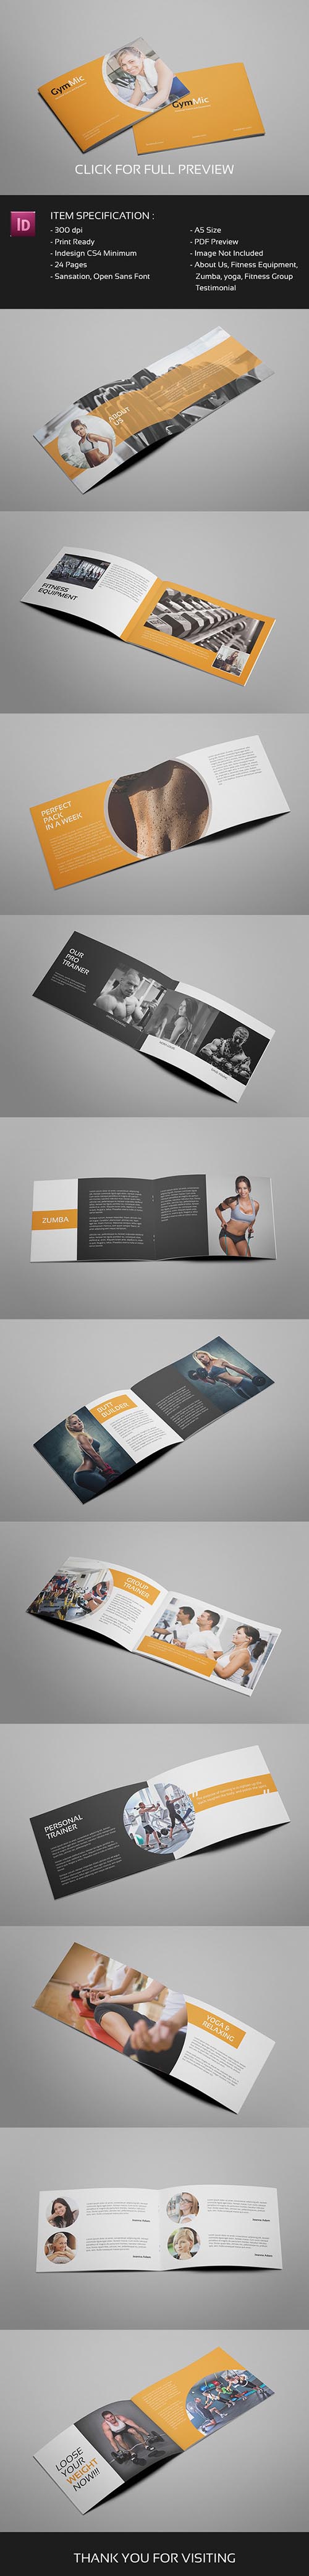 Gymmic - A5 Fitness and Gym Brochure